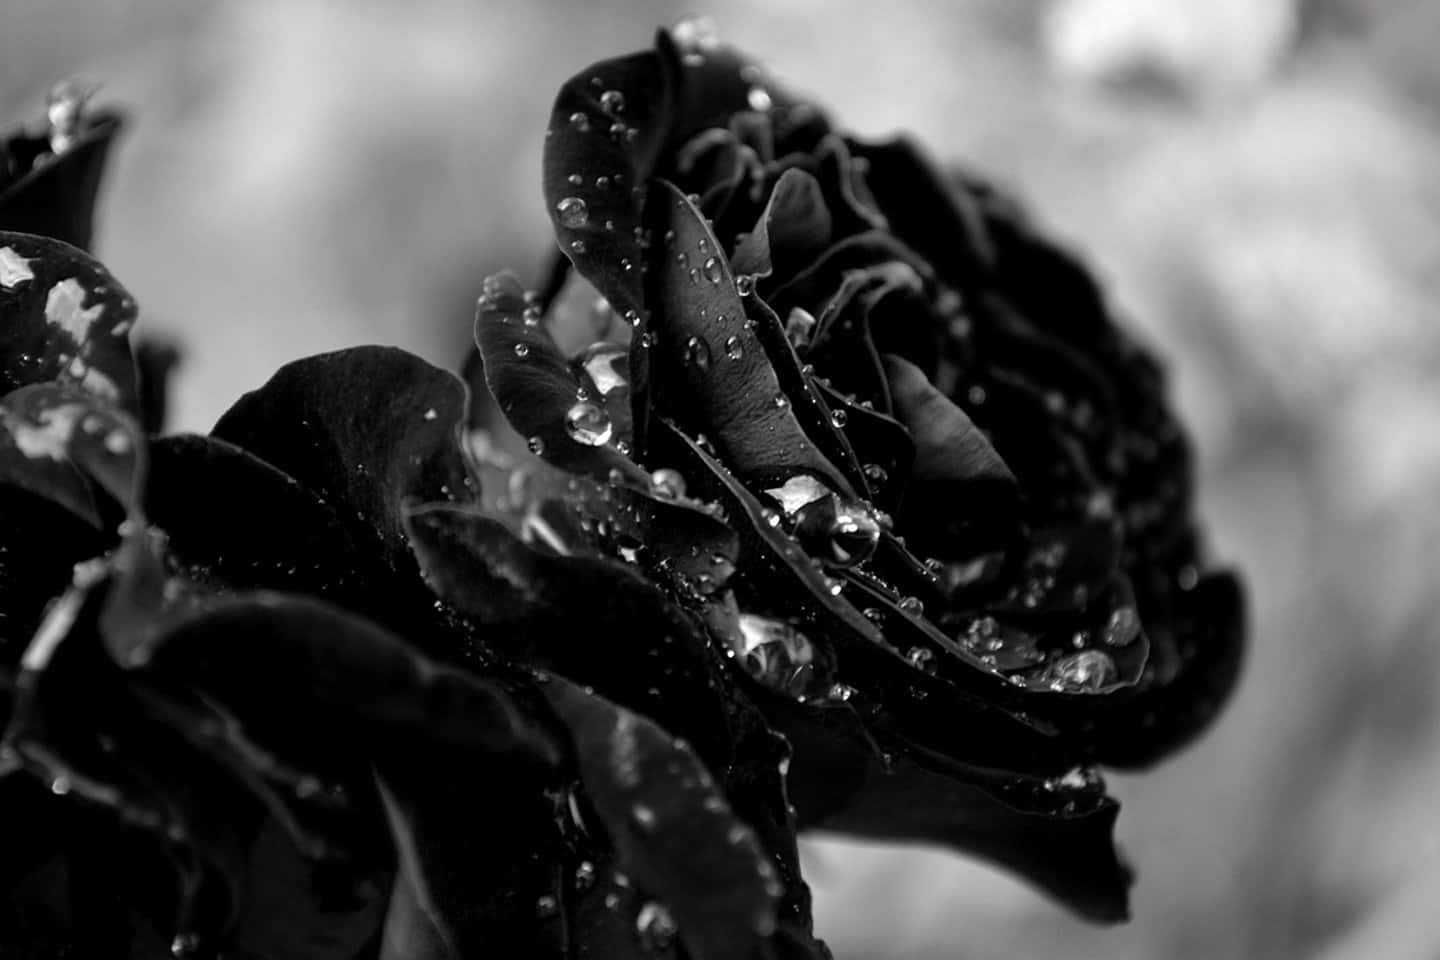 Add some drama to your life with this beautiful black rose